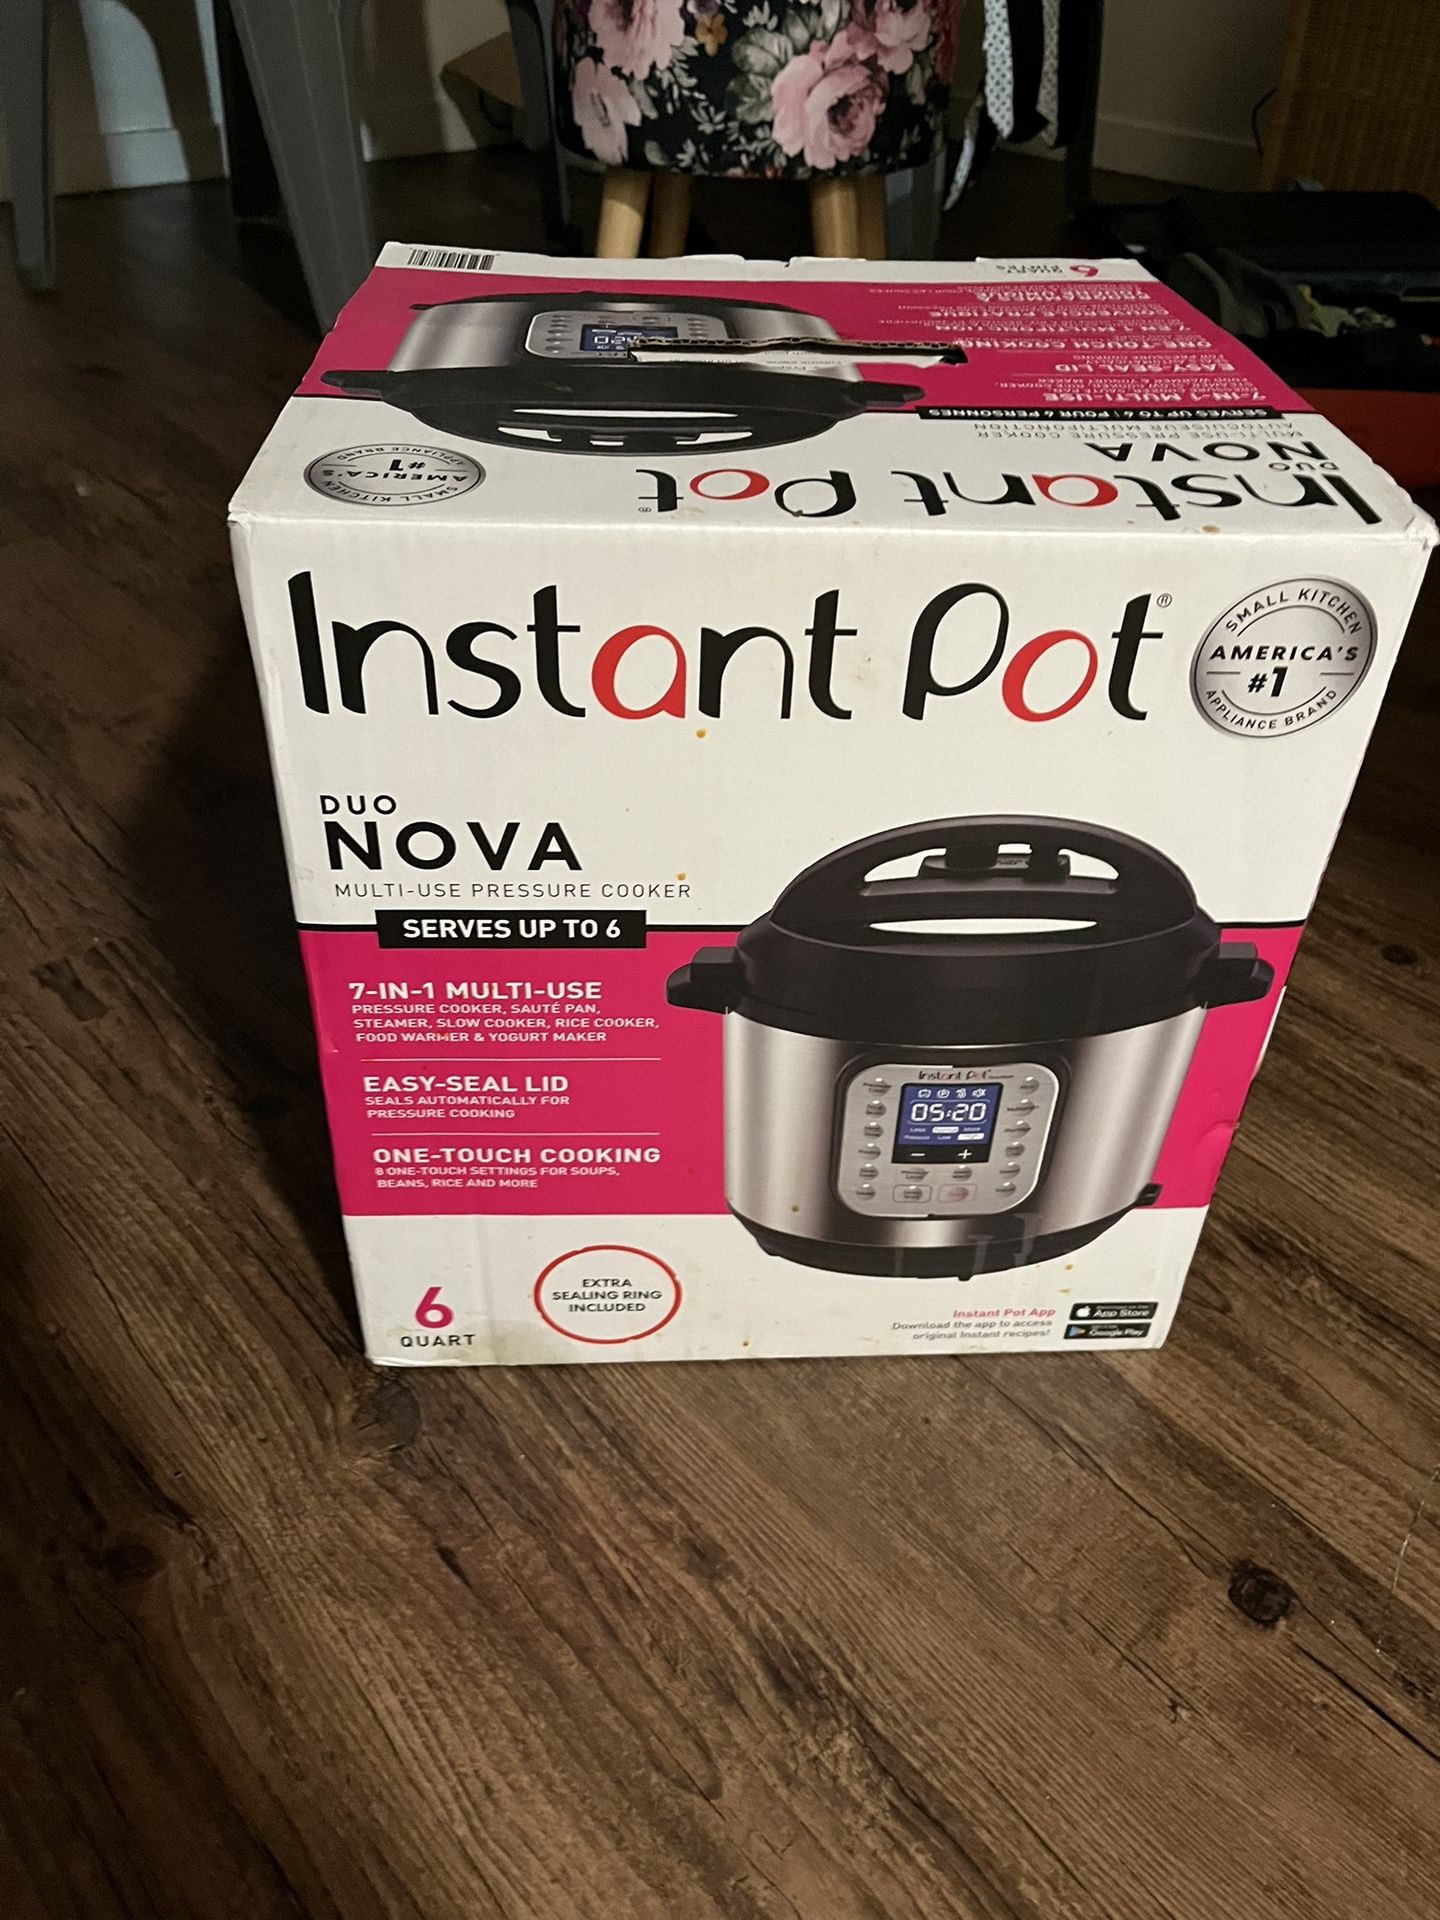 Instant Pot -brand new, never opened.